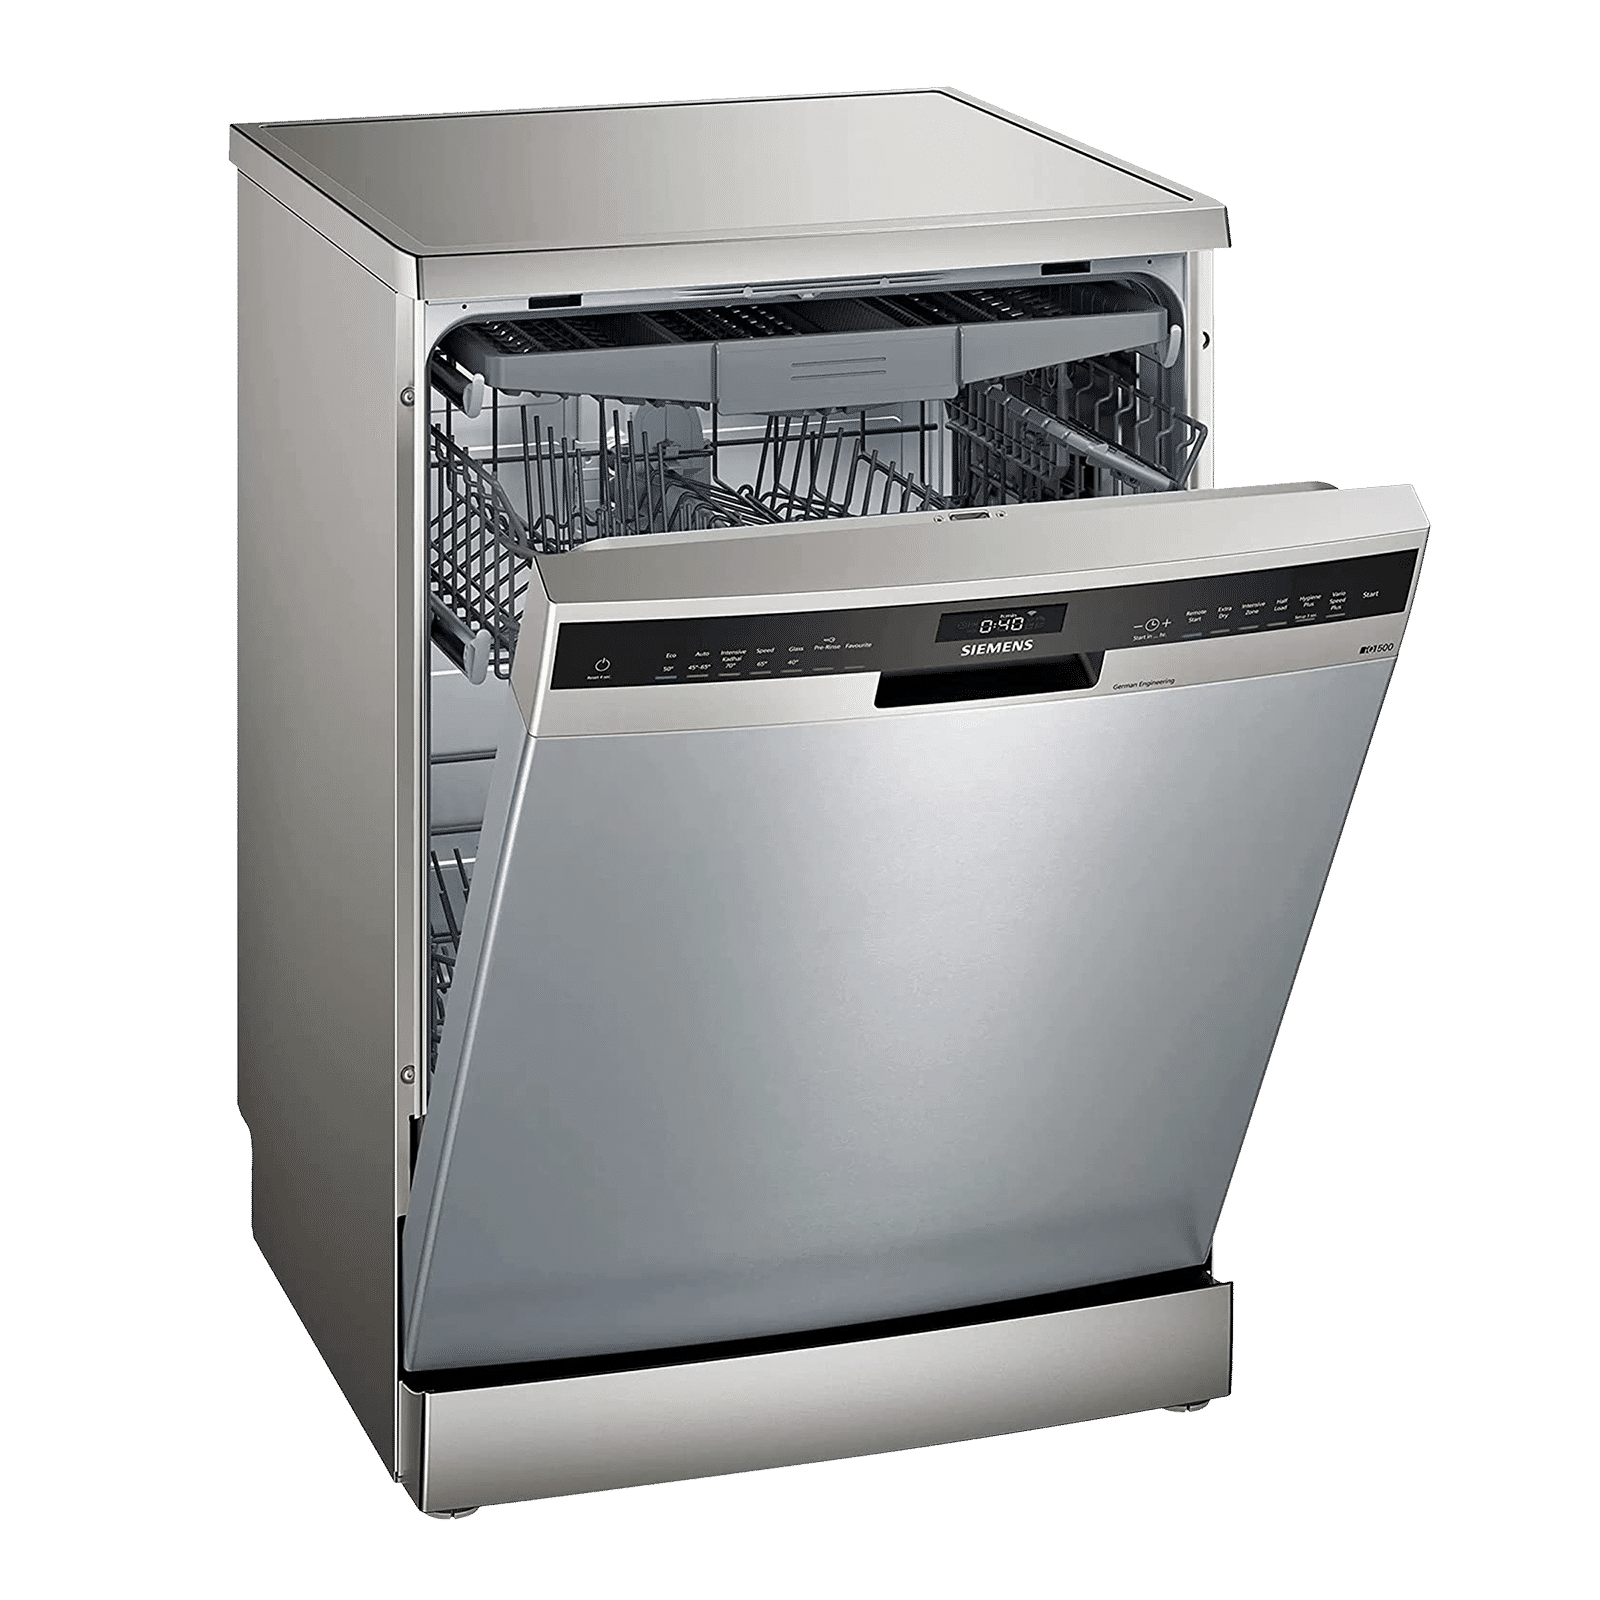 How to Fix a Dishwasher That Fills with Too Much Water - Appliance Express